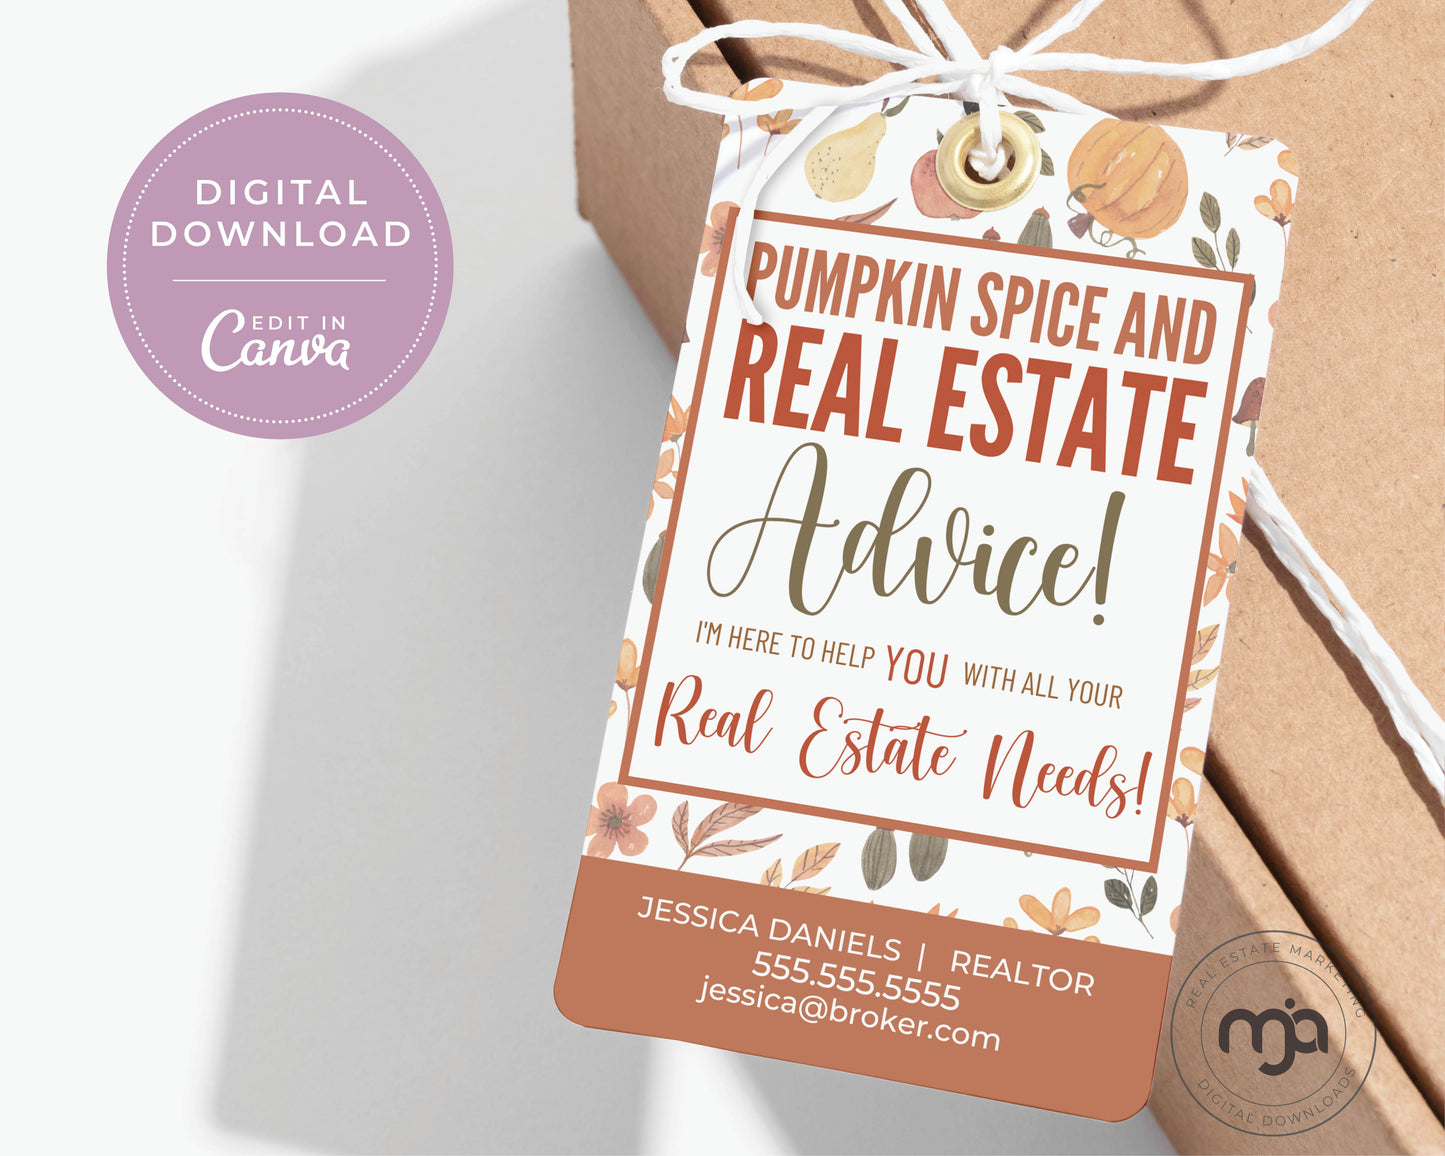 Pumpkin Spice and Real Estate Advice - Fall Pop By Gift Tag